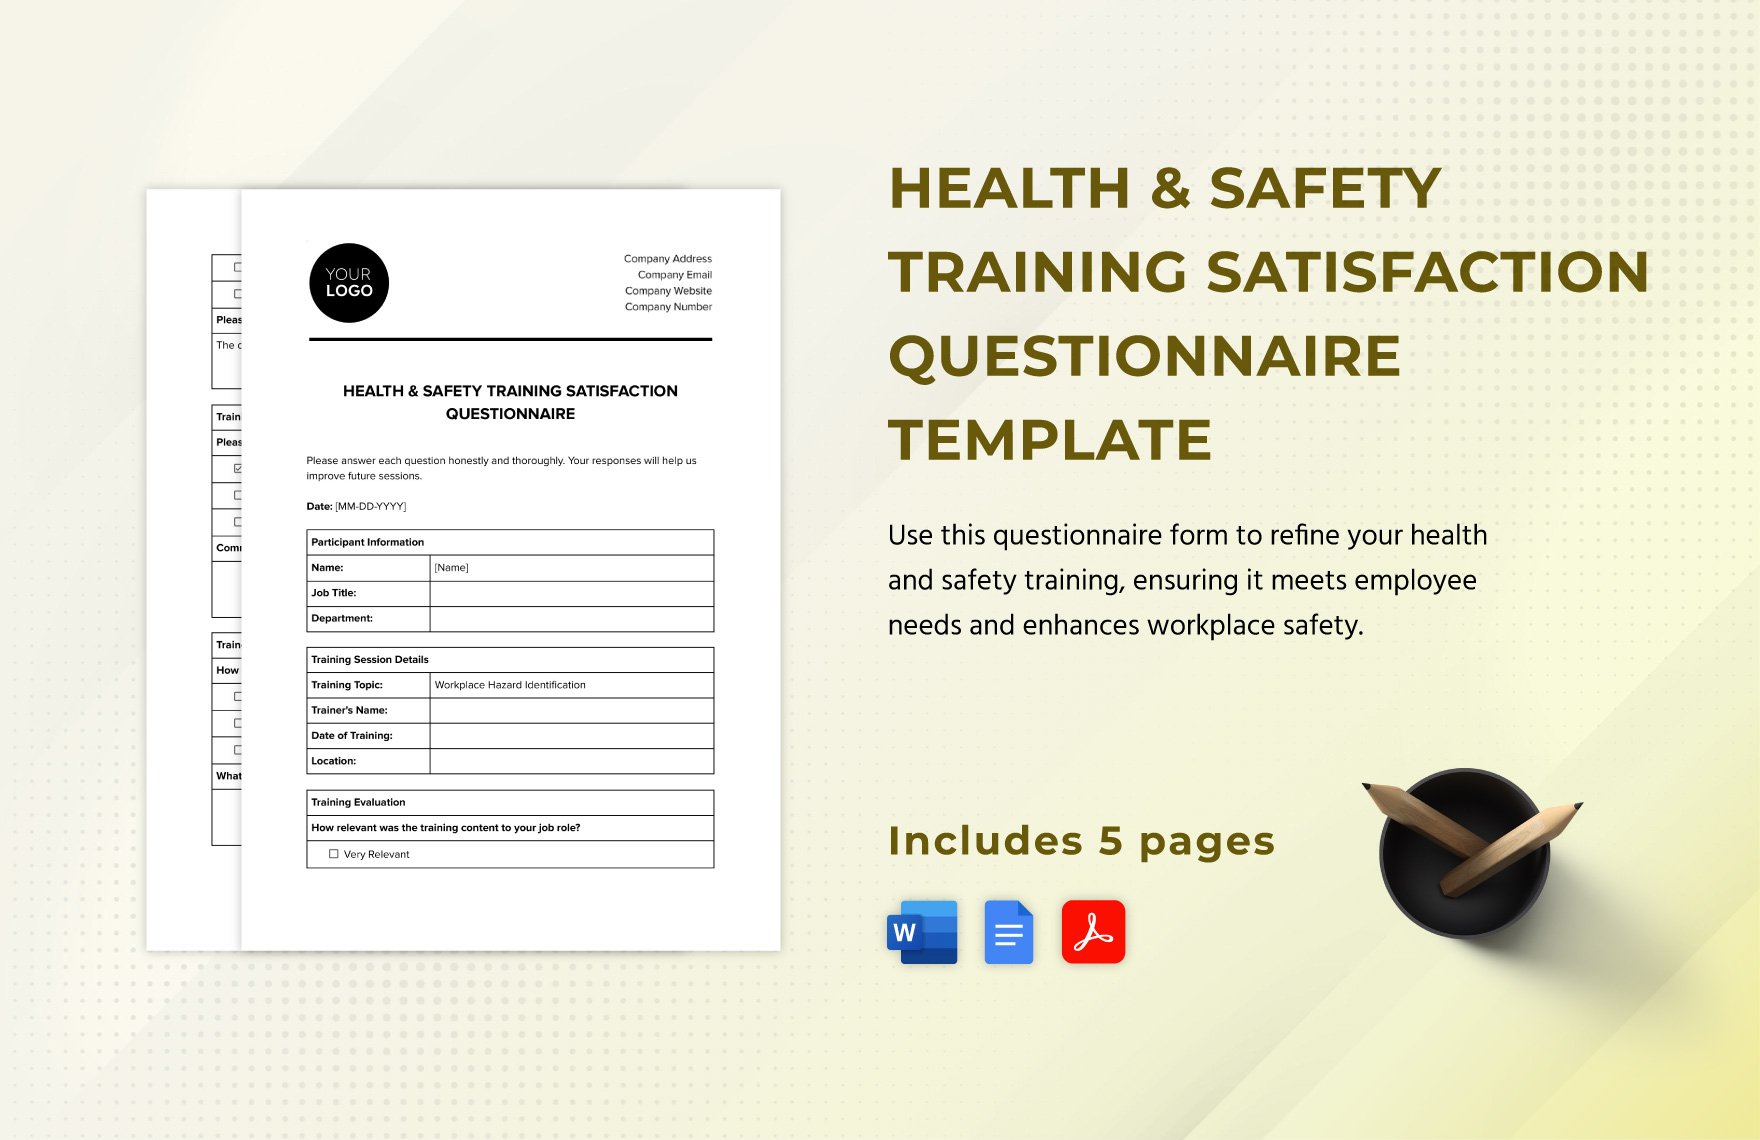 Health & Safety Training Satisfaction Questionnaire Template